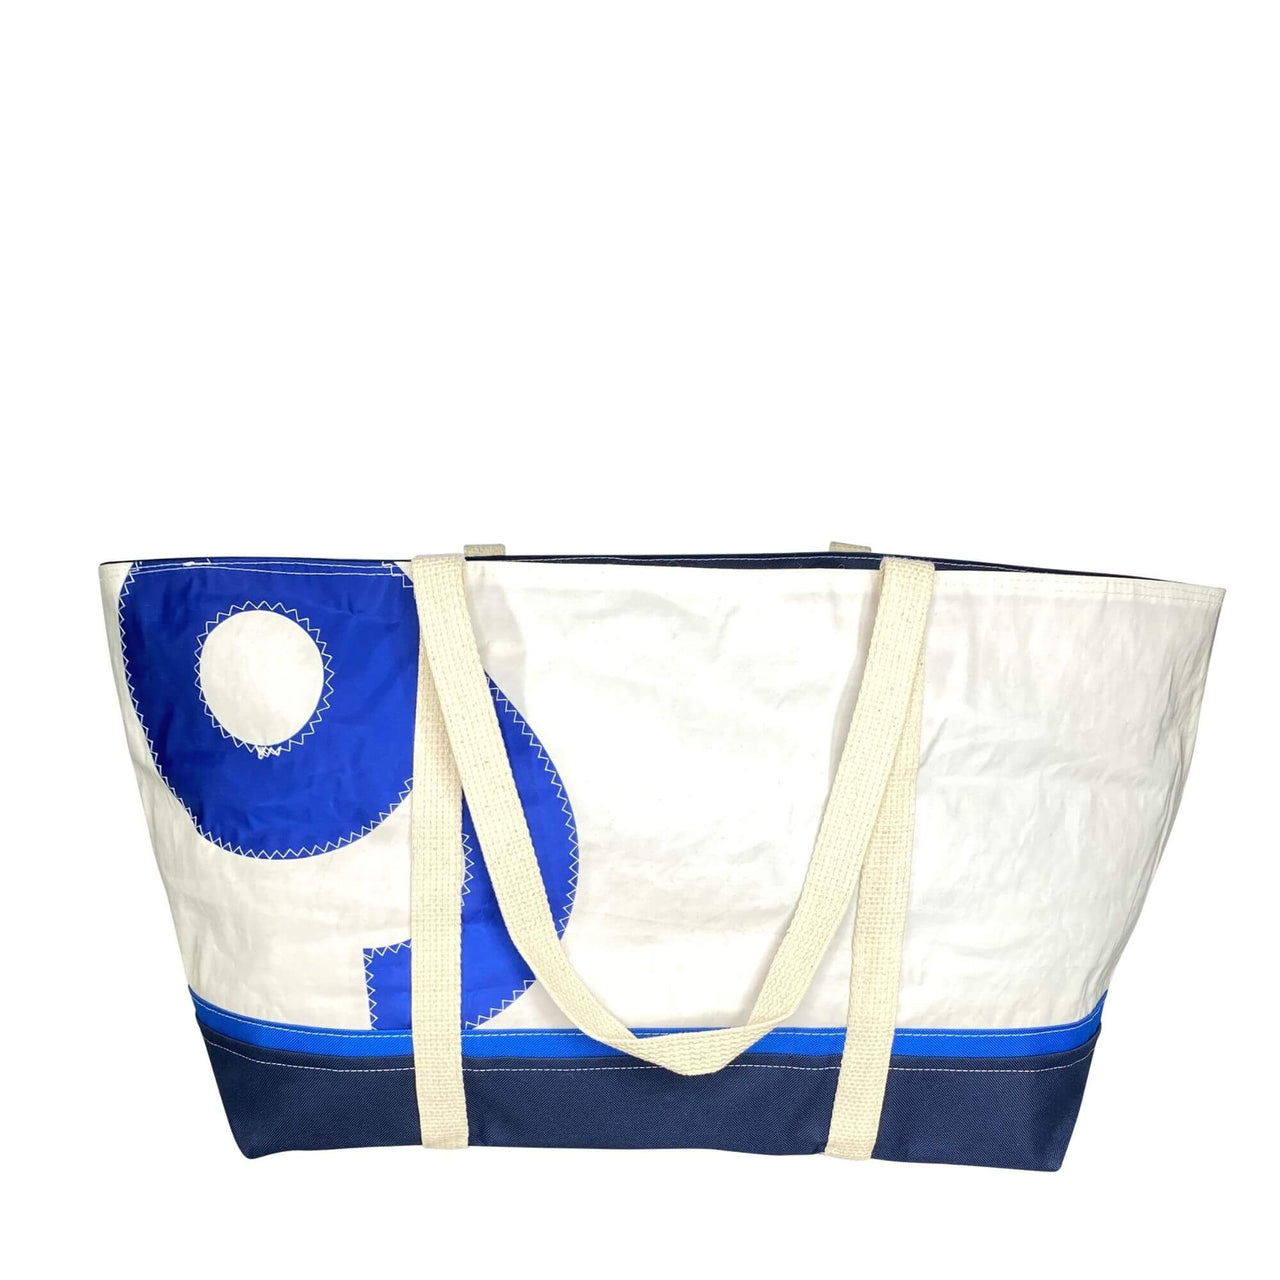 Recycled Sail Bag, Tote Bag Handmade from Sails, Blue & Navy Blue